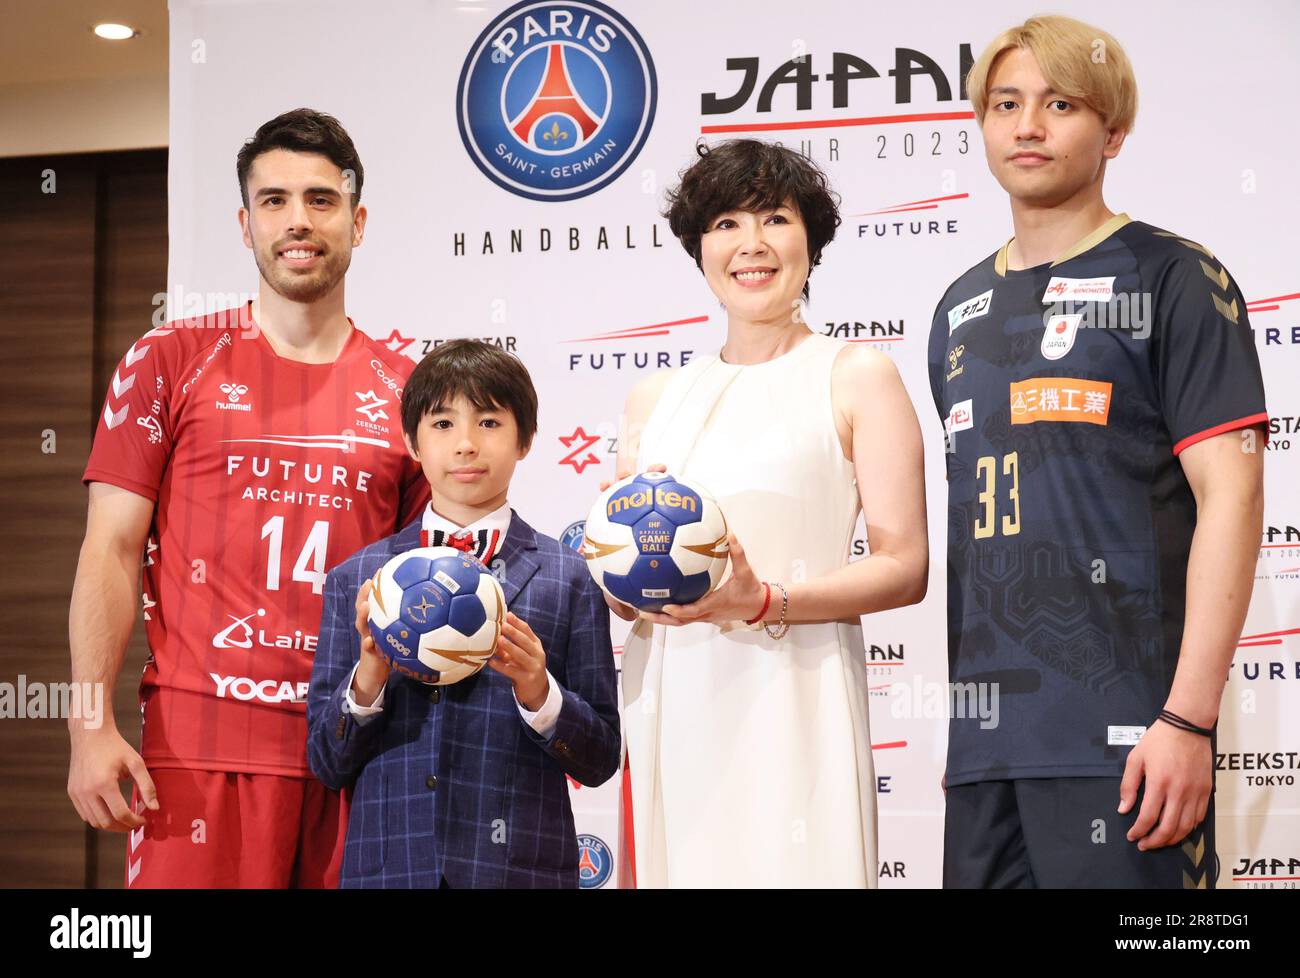 Tokyo, Japan. 22nd June, 2023. Japanese actress Shinobu Terajima (2nd R) and her son kabuki actor Mahoro Terajima (2nd L) with handball players Yuto Agarie (R) and Remi Anri Doi (L) pose for phioto as they attend a promotional event of French handball team Paris Saint-German's Japan tour in Tokyo on Thursday, June 22, 2023. Paris Saint-German handball team will have games with Zeekstar Tokyo and Japanese national team. (photo by Yoshio Tsunoda/AFLO) Stock Photo